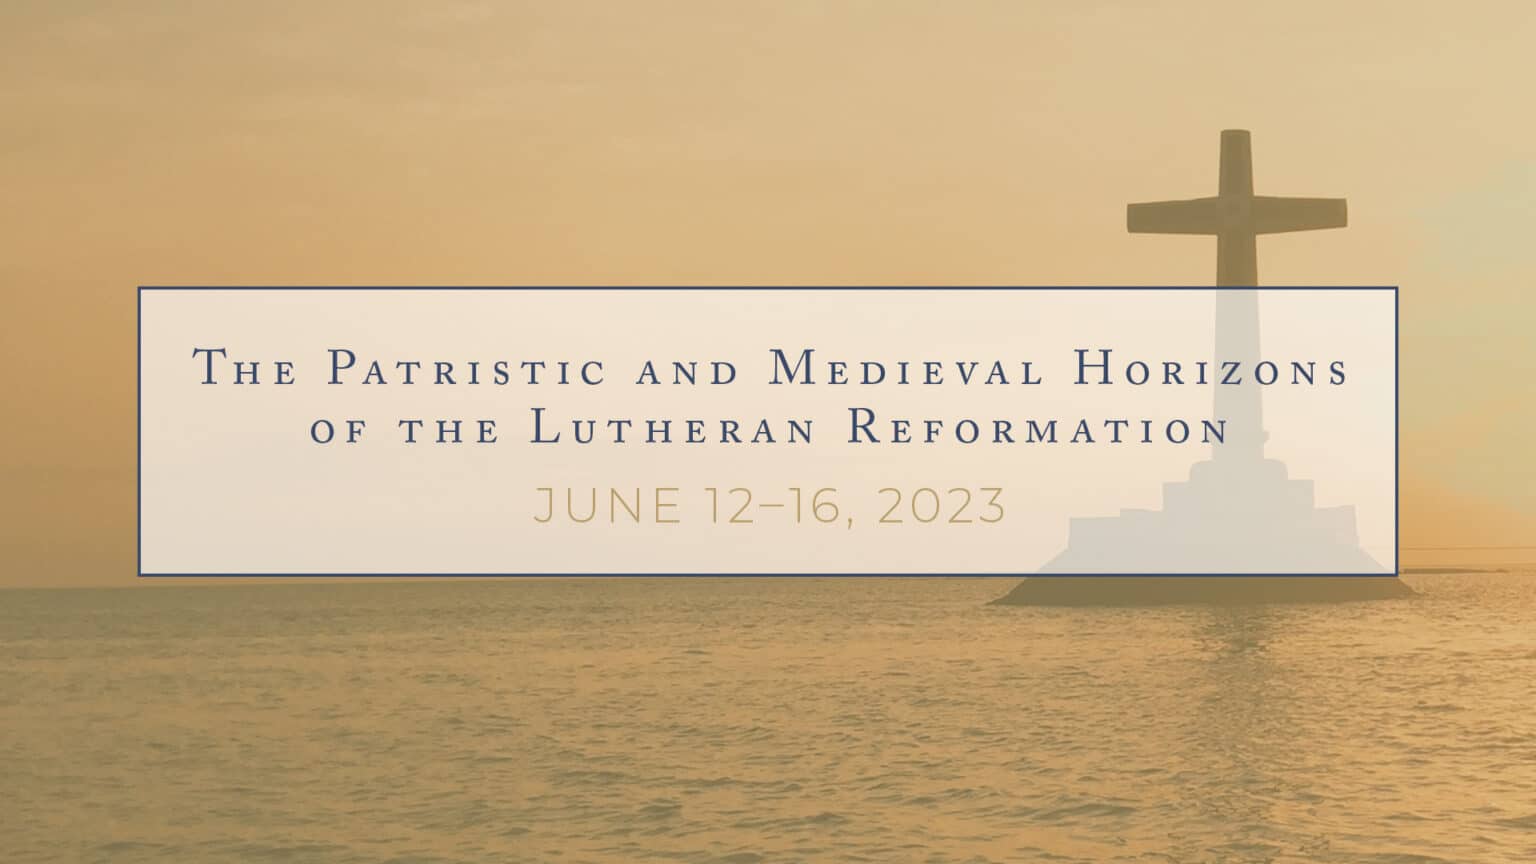 The Patristic and Medieval Horizons of the Lutheran Reformation